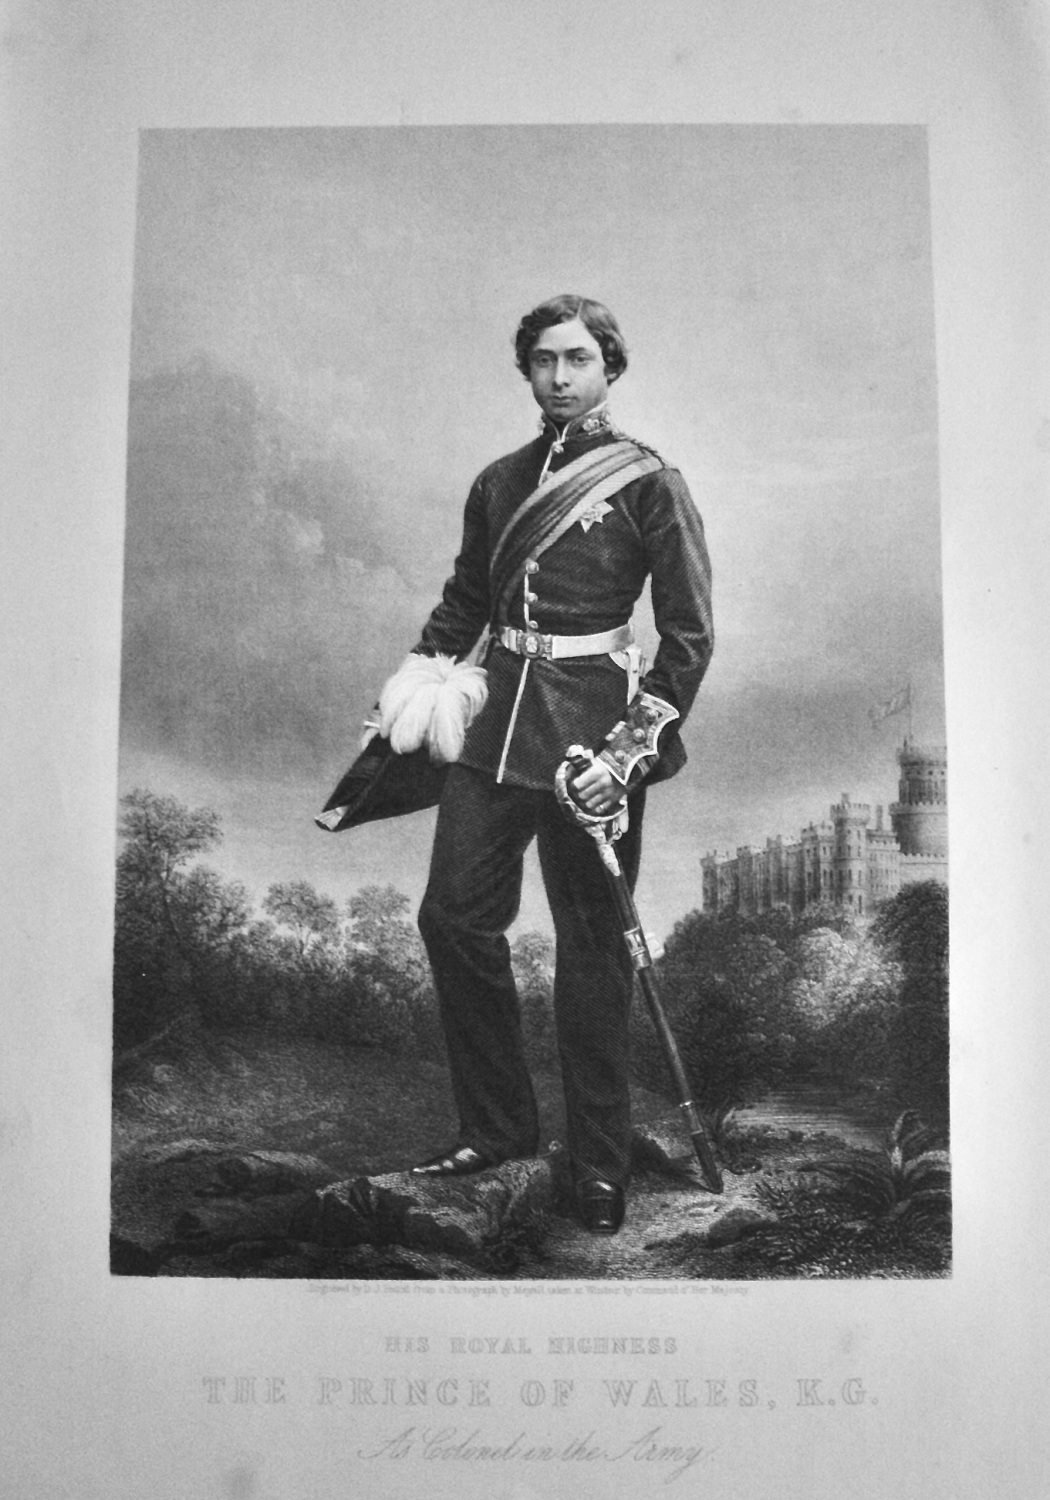 His Royal Highness The Prince of Wales, K.G.  As Colonel in the Army.  1859